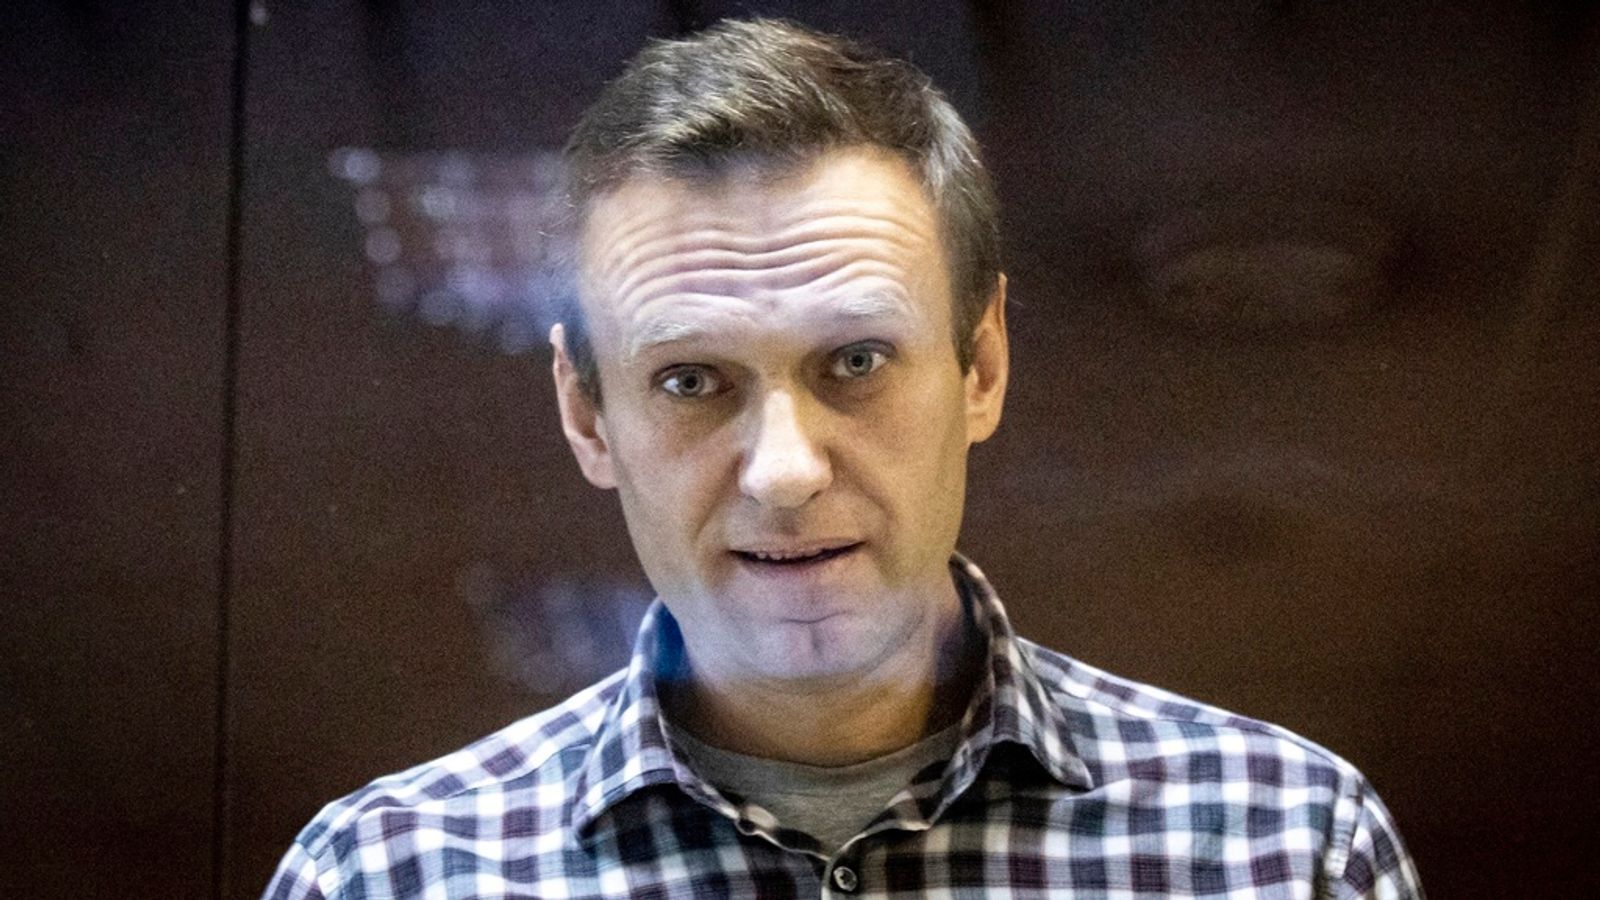 Vladimir Putin's main political opponent Alexei Navalny 'missing' after removal from Russian prison colony